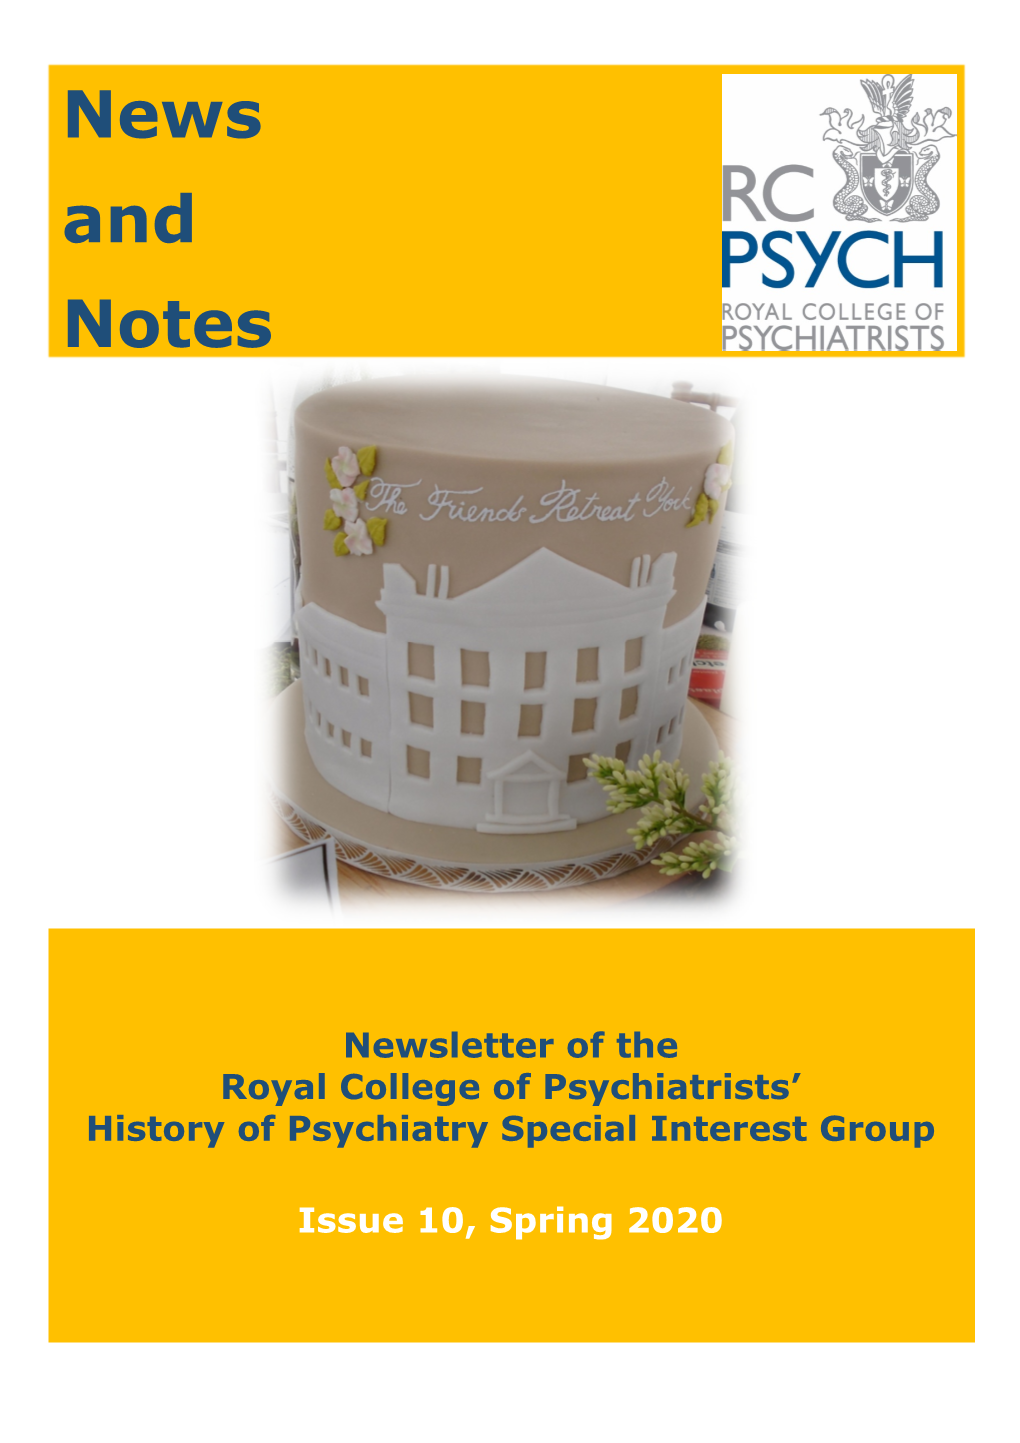 Newsletter of the Royal College of Psychiatrists' History of Psychiatry Special Interest Group